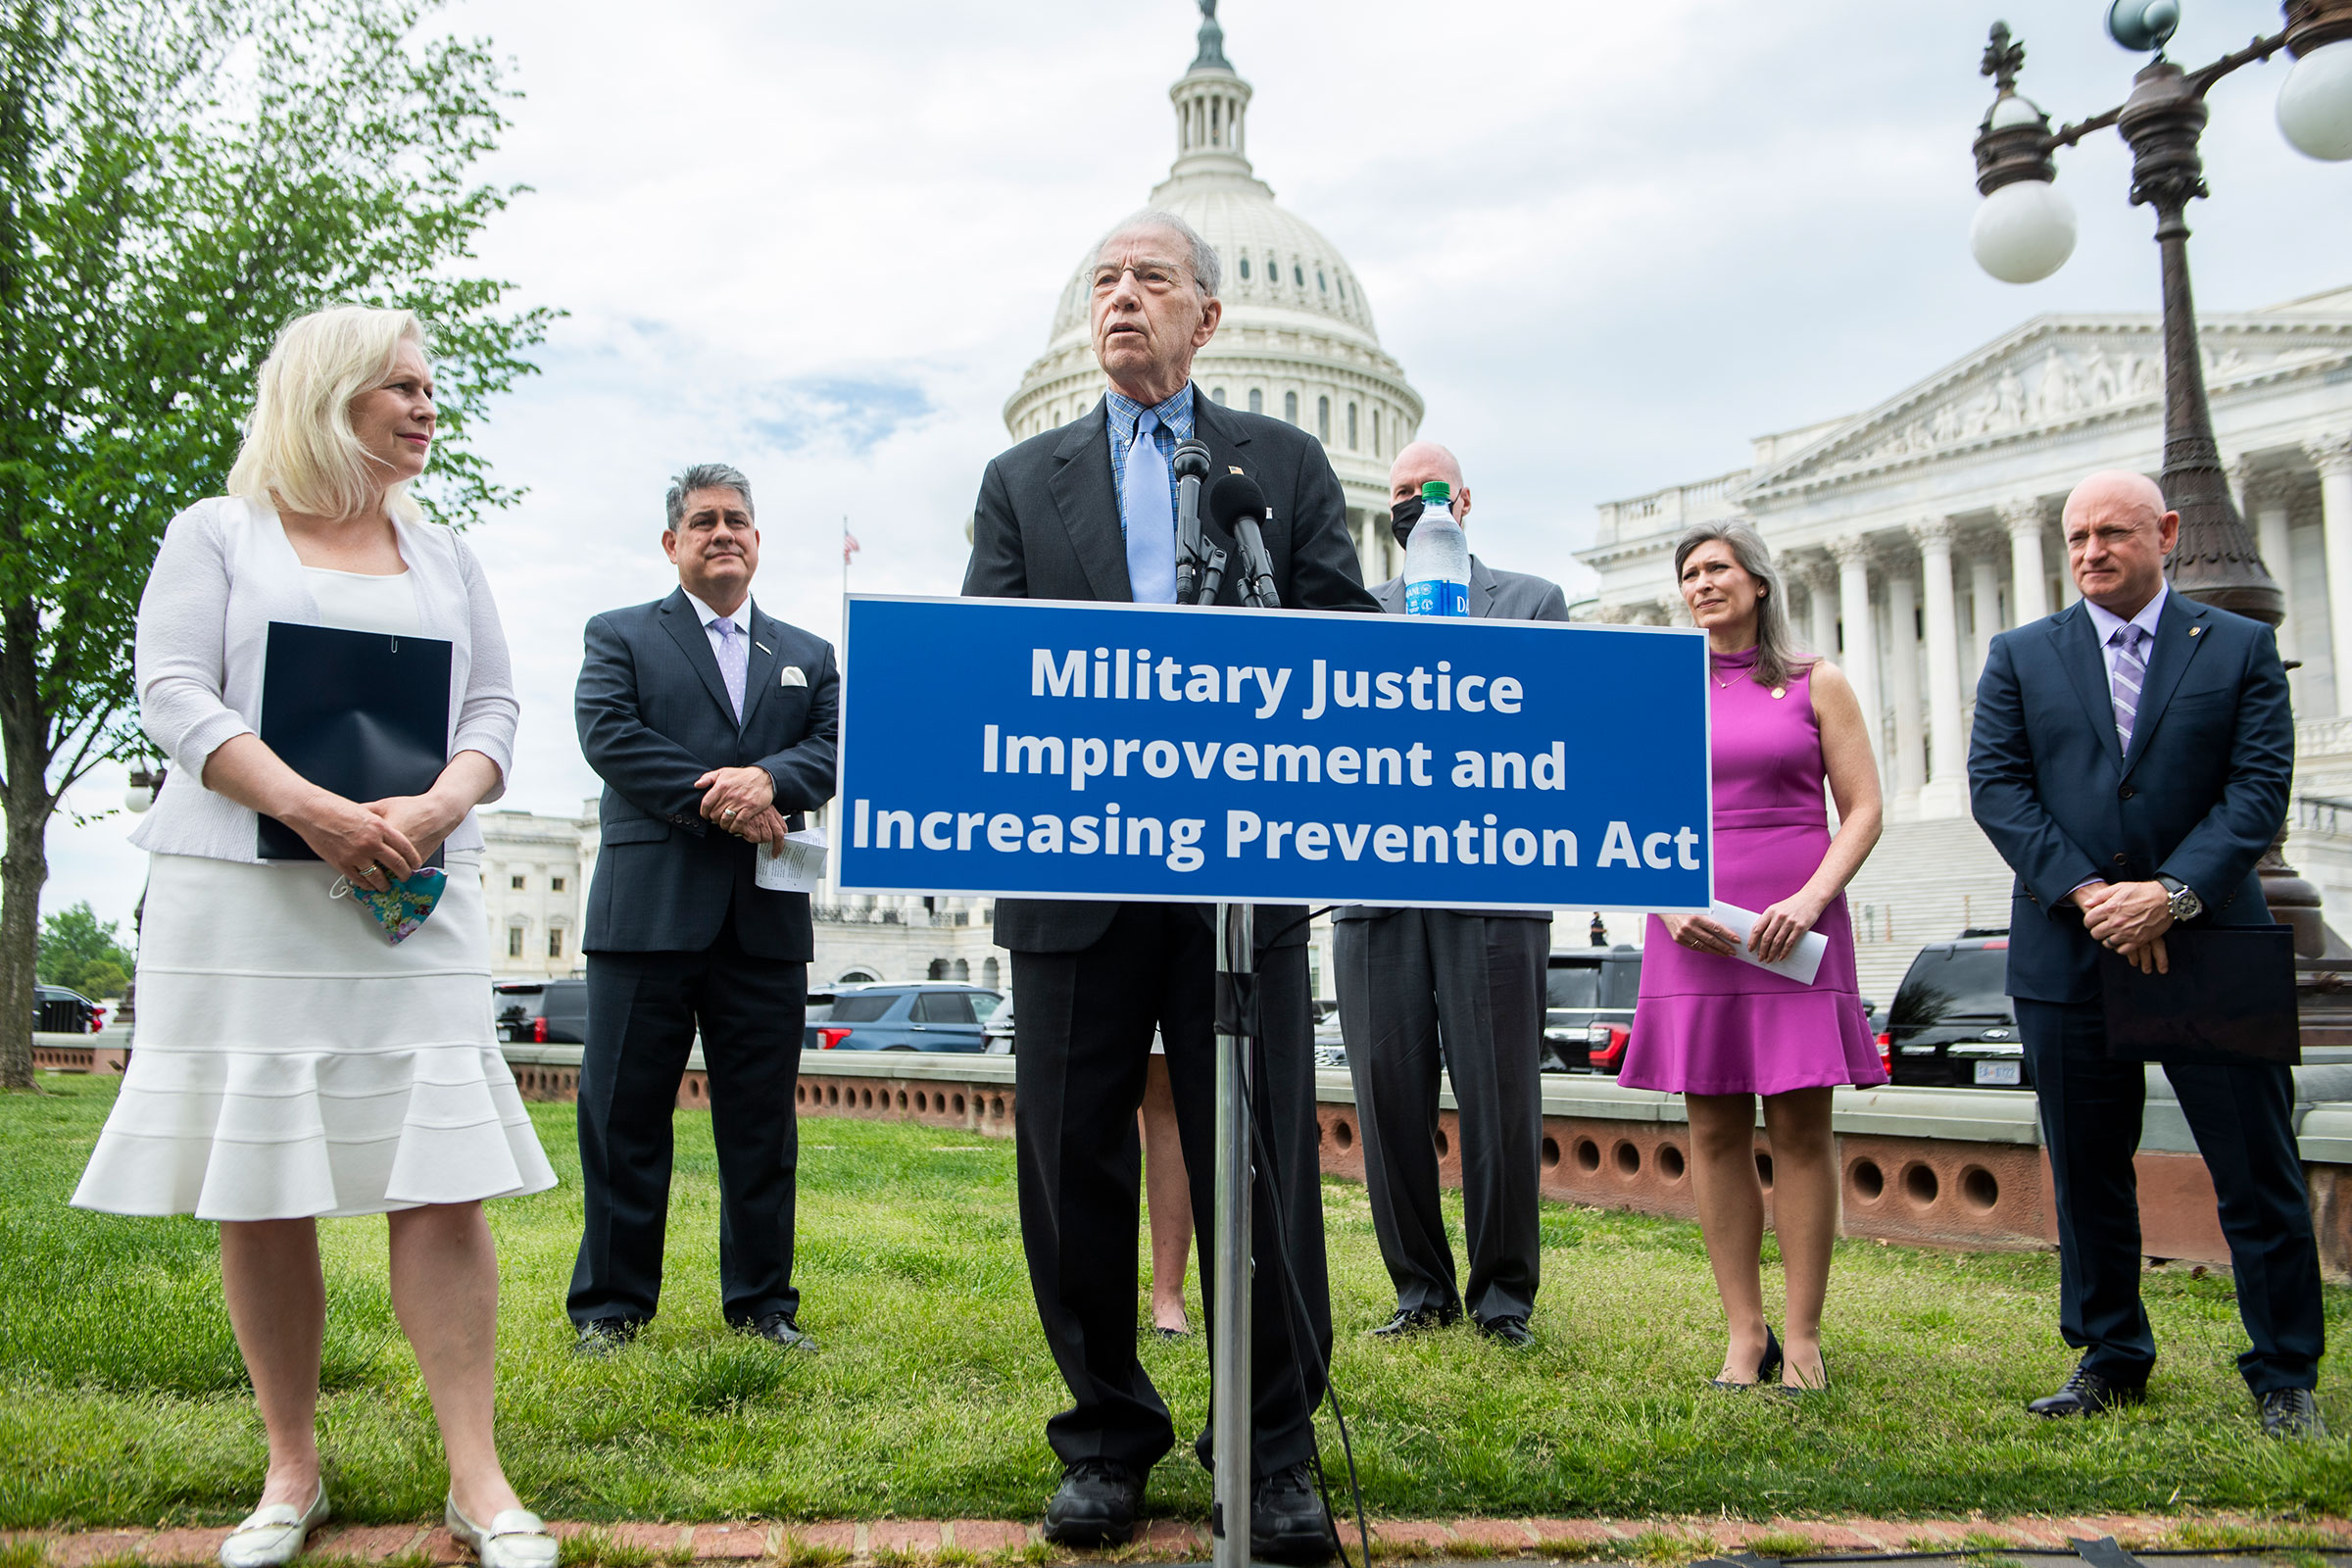 From left, Sen. Kirsten Gillibrand, Tom Porter of Iraq and Afghanistan Veterans of America, Sen. Chuck Grassley, Col. Don Christensen, former chief prosecutor for the USAF, Sens. Joni Ernst, R-Iowa, and Mark Kelly conduct a news conference outside the Capitol to discuss the Military Justice Improvement and Increasing Prevention Act, on April 29, 2021. (Tom Williams—CQ-Roll Call/Getty Images)